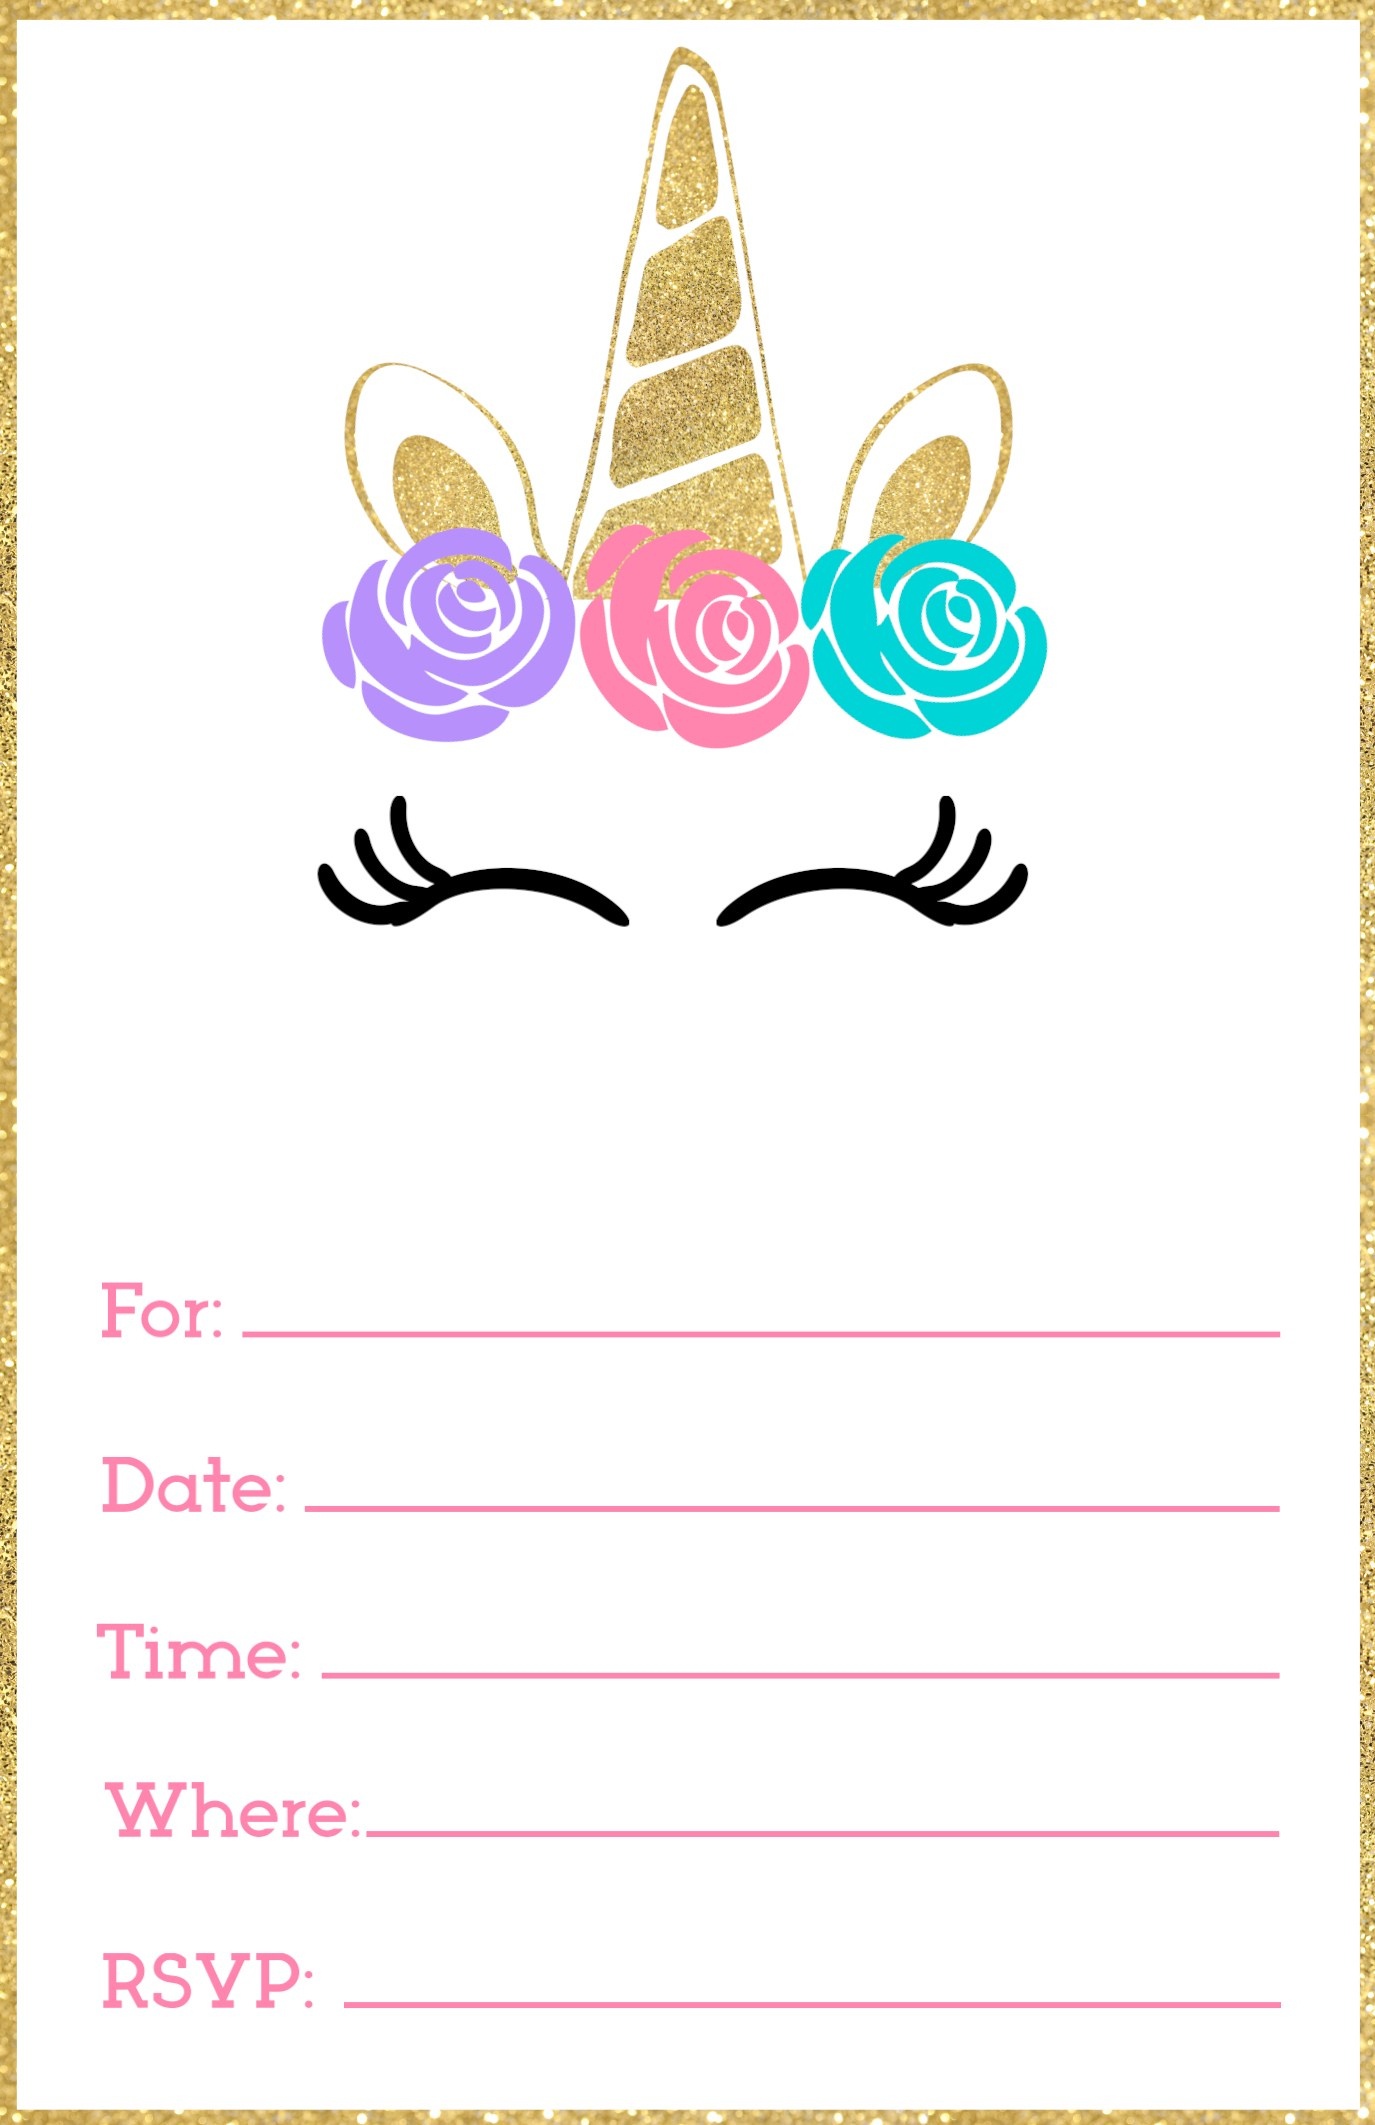 Free Printable Unicorn Invitations Template - Paper Trail Design - Free Printable Birthday Invitations With Pictures